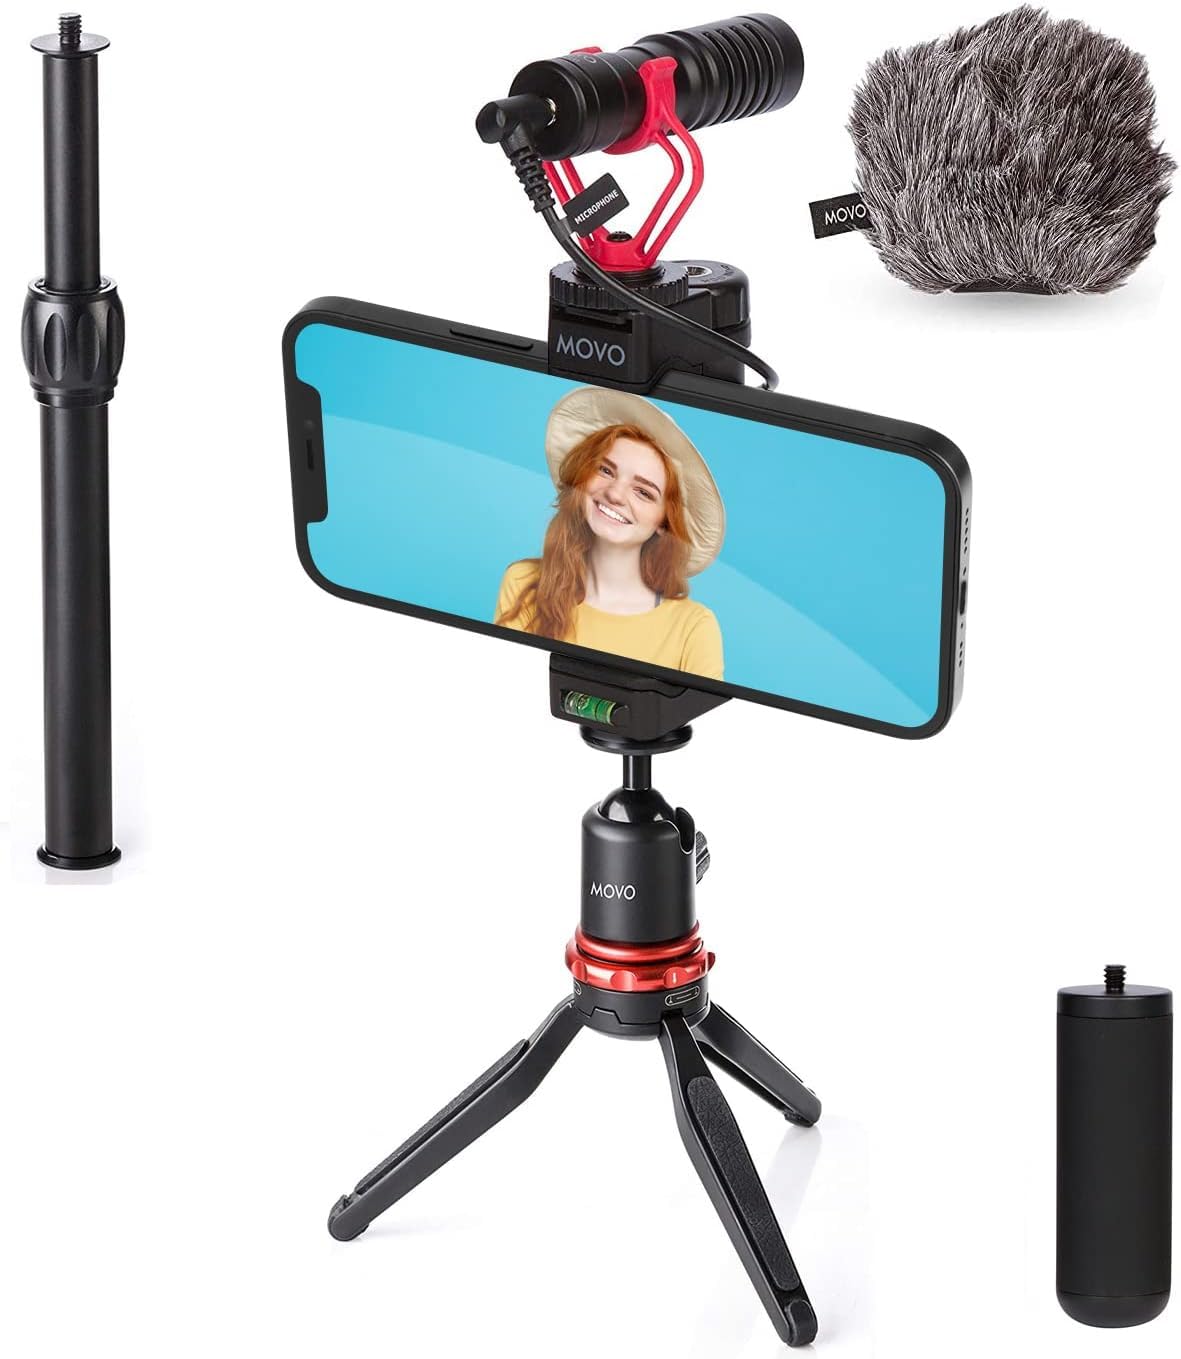 Movo VXR10+ Smartphone Vlogging Kit with Mini Tripod, Phone Grip, and Video Microphone Compatible with iPhone and Android - for YouTube, TIK Tok, Filming, Vlogging  - Good